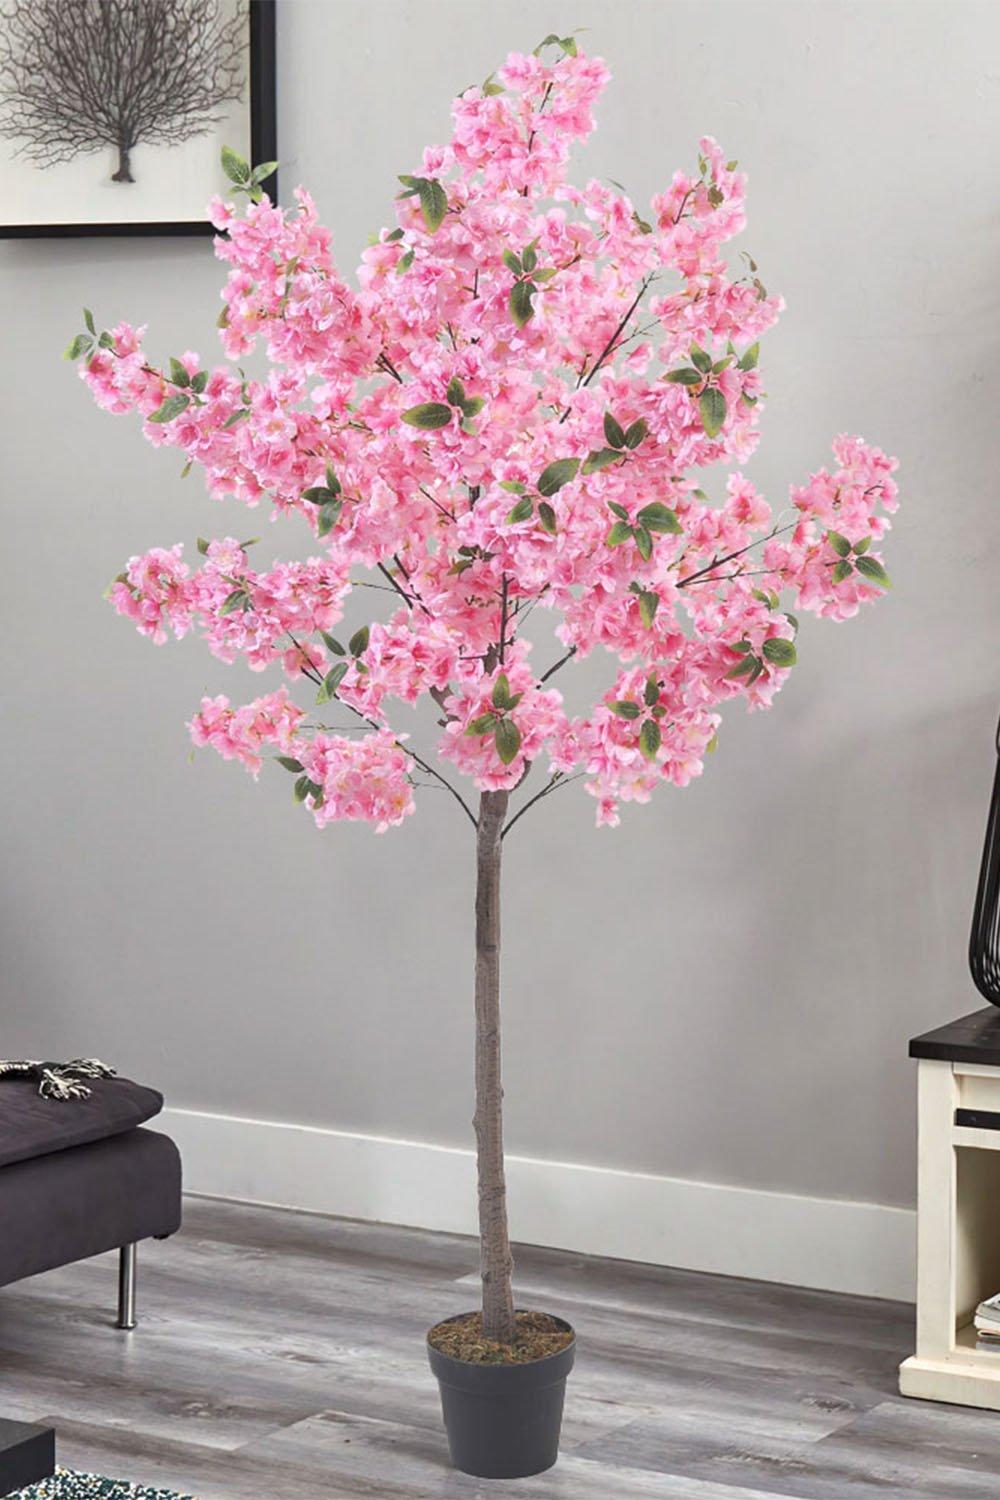 1.8m H Artificial Cherry Blossom Tree Decorative Potted Plant